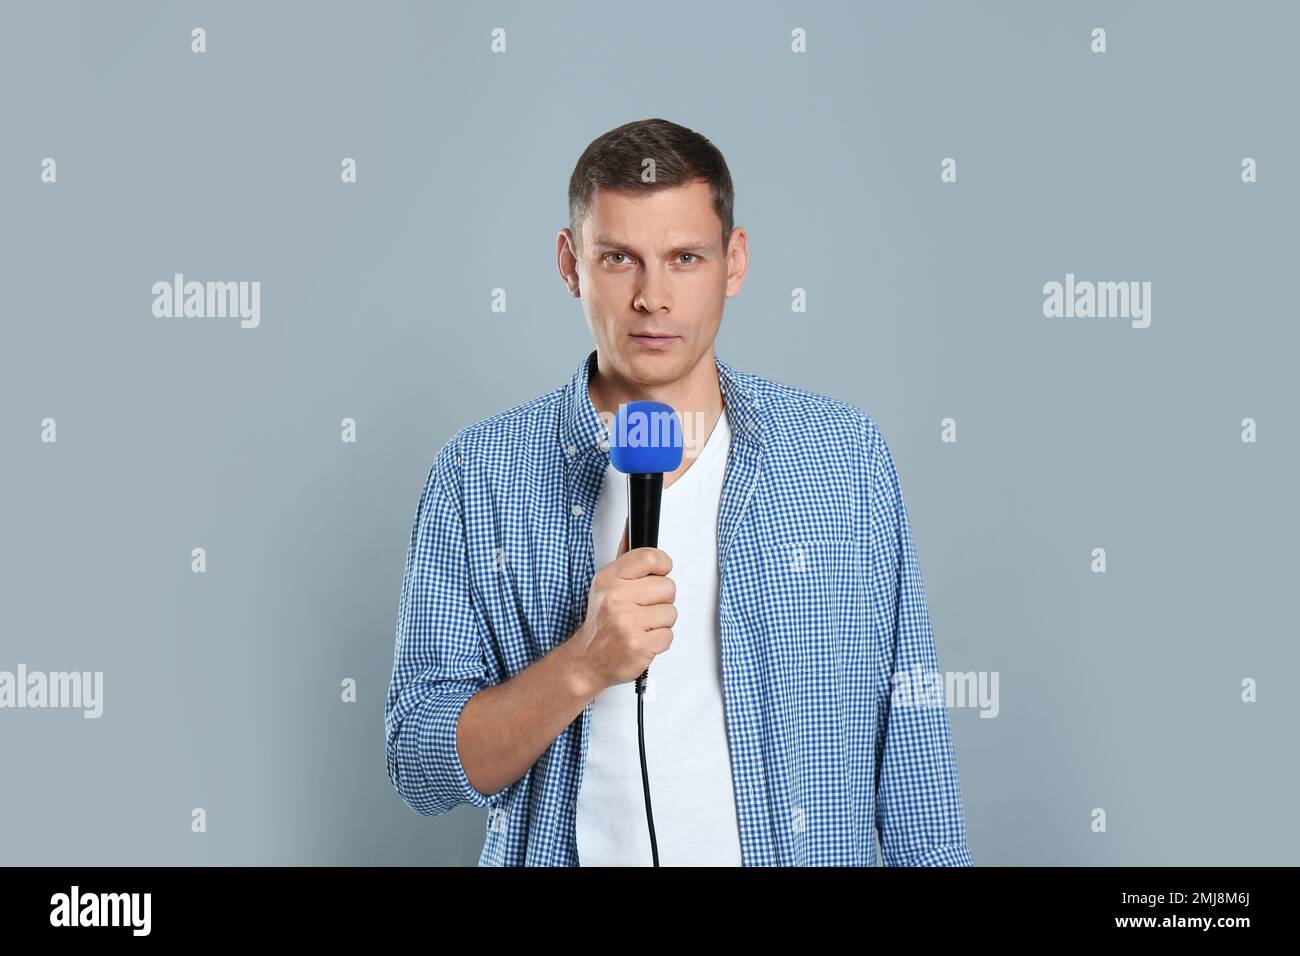 Male Journalist With Microphone On Grey Background Stock Photo Alamy